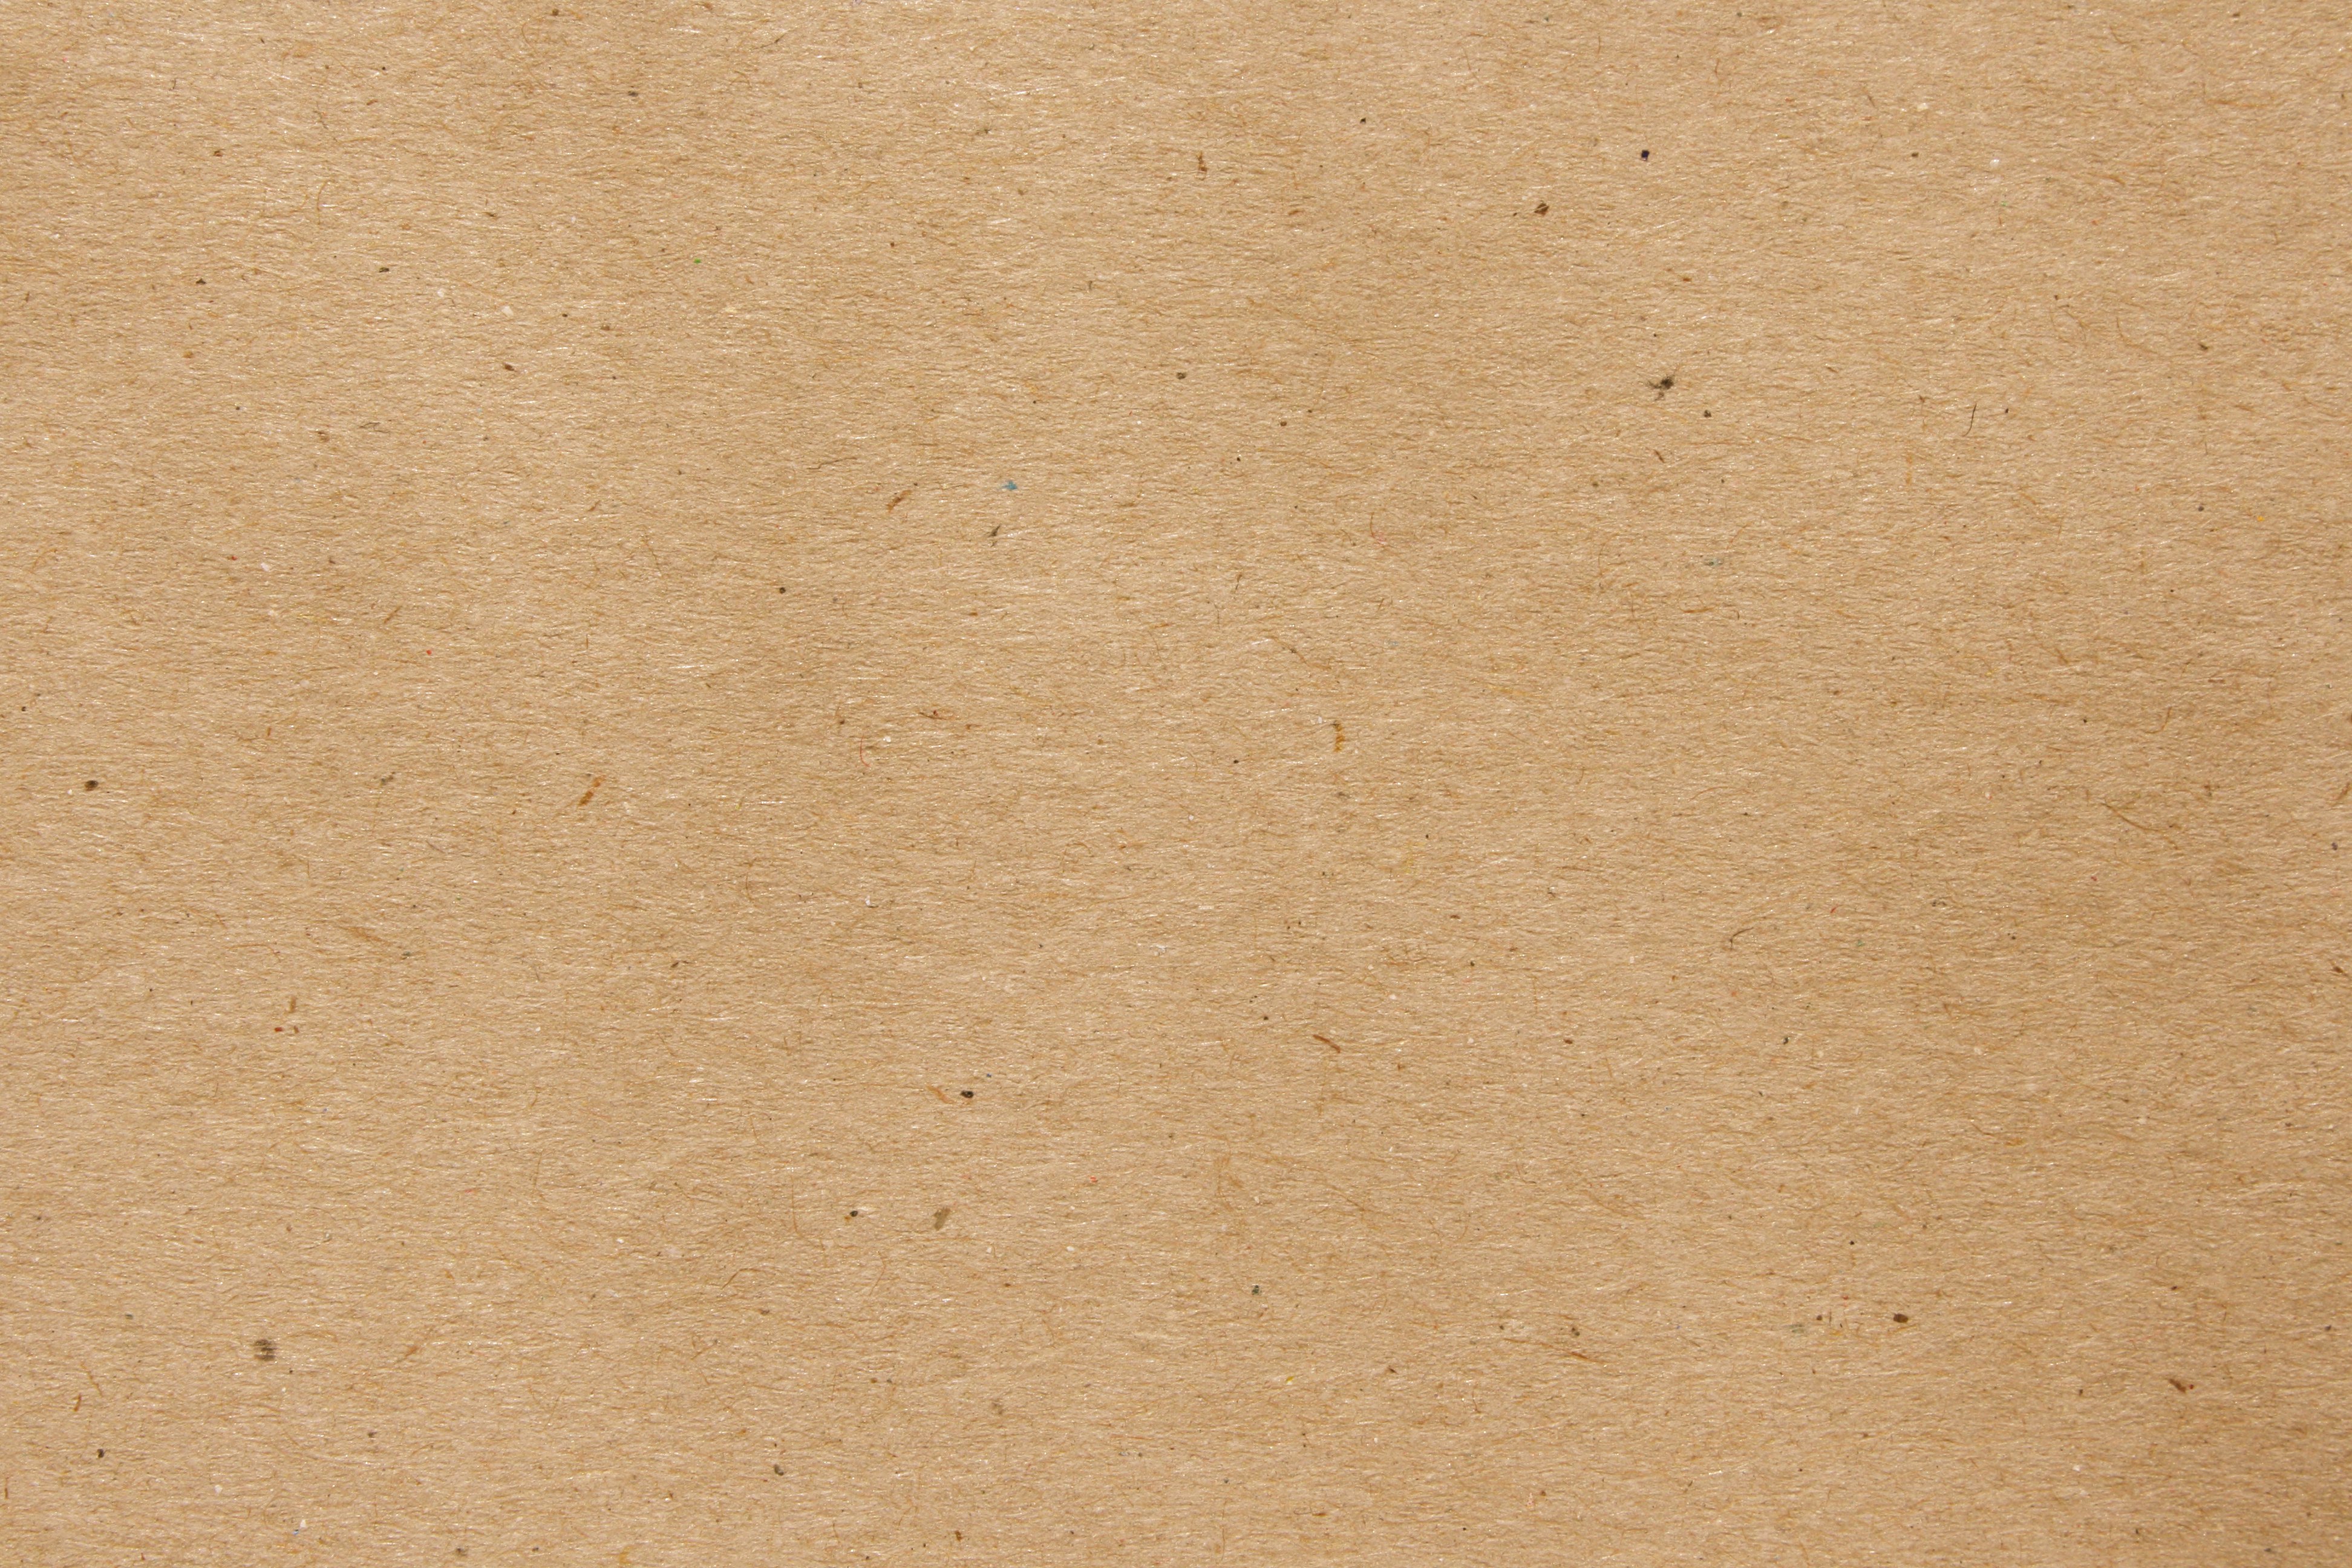 Light Brown or Tan Paper Texture with Flecks Picture Free Photograph